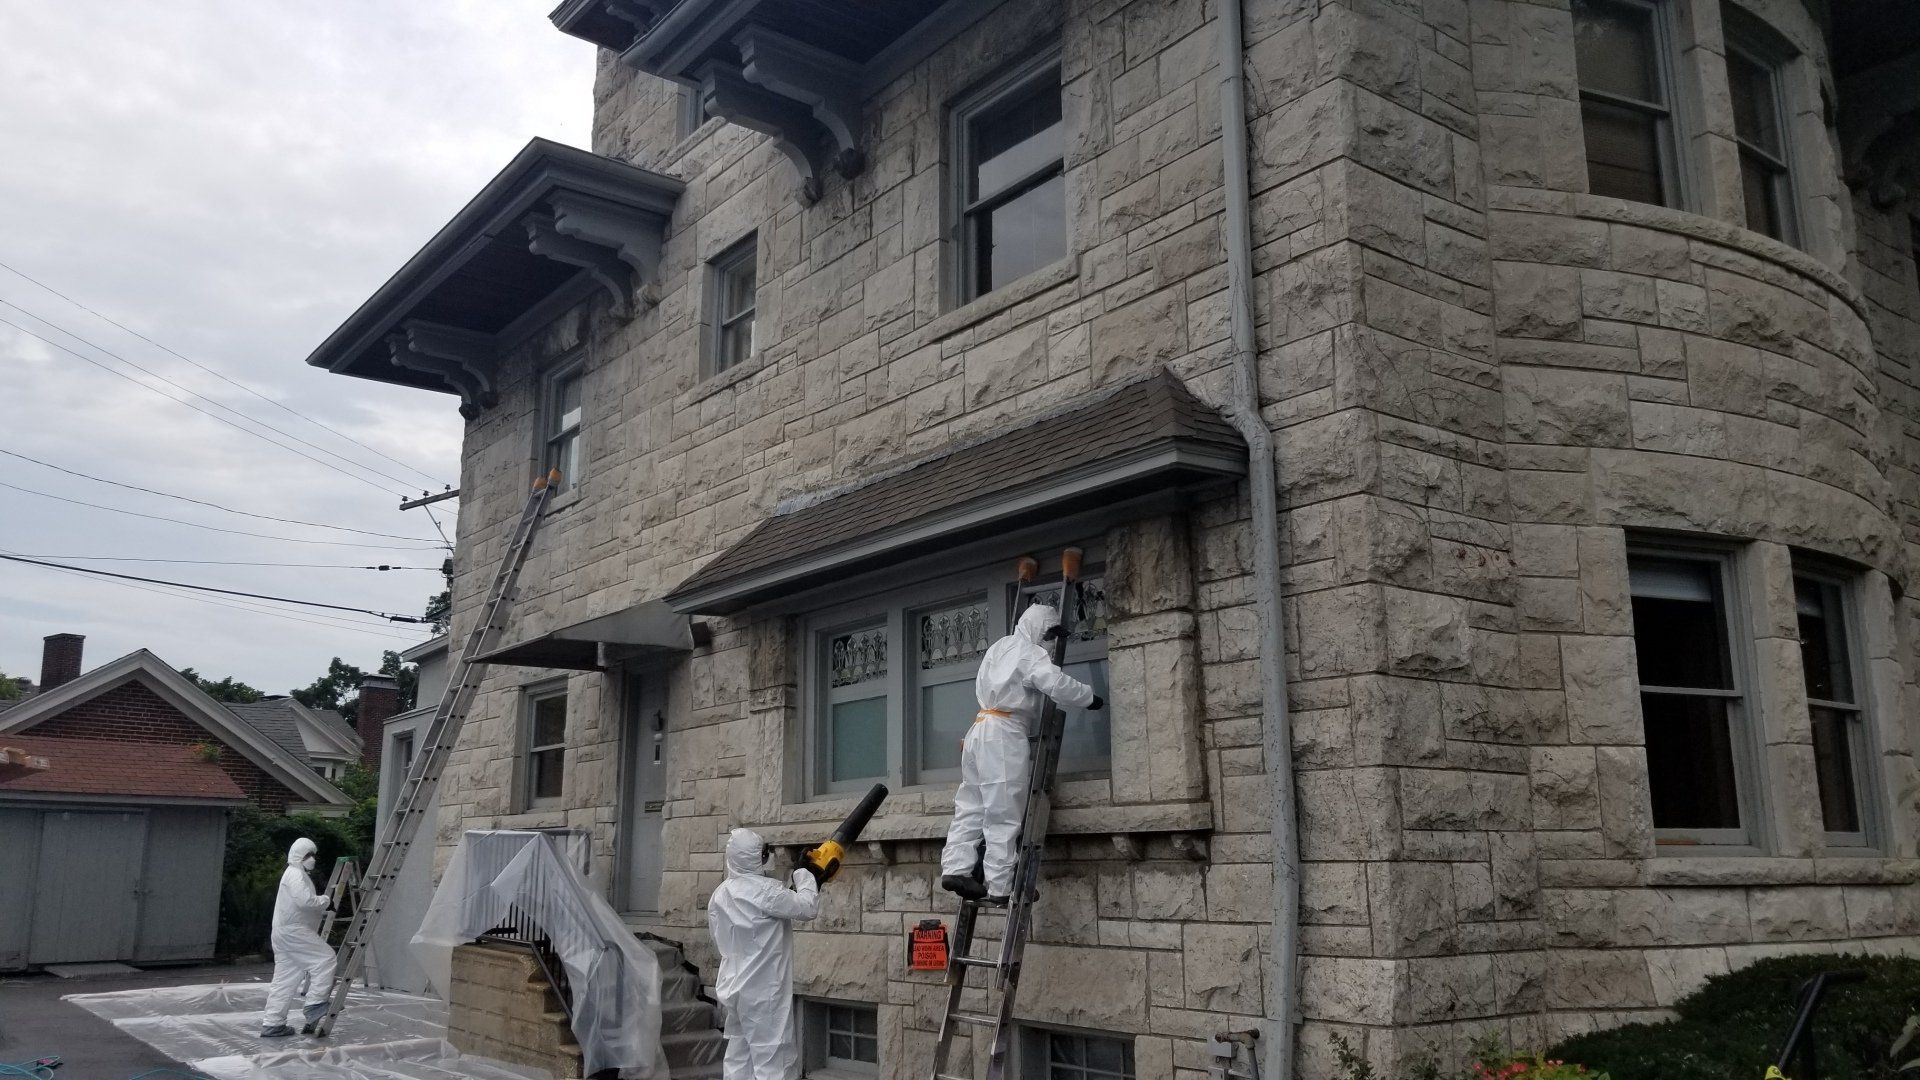 3 people in hazmat suits removing lead paint from old stone house